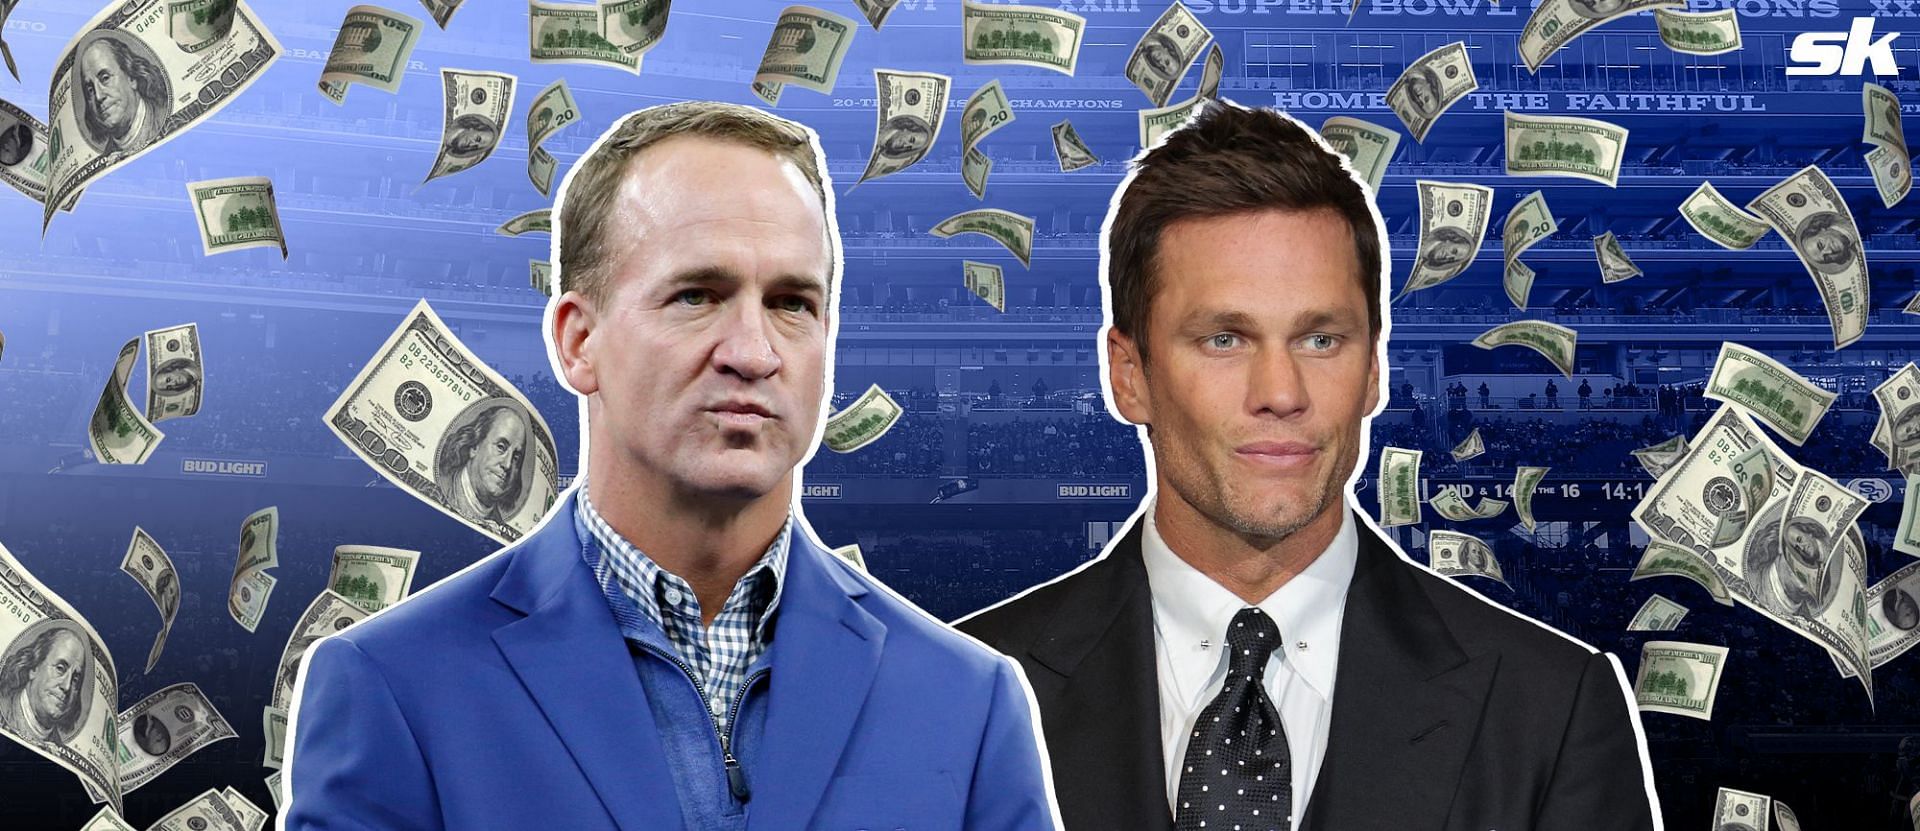 Tom Brady vs Peyton Manning rivalry intensifies as legendary QBs chase financial success post-NFL retirement